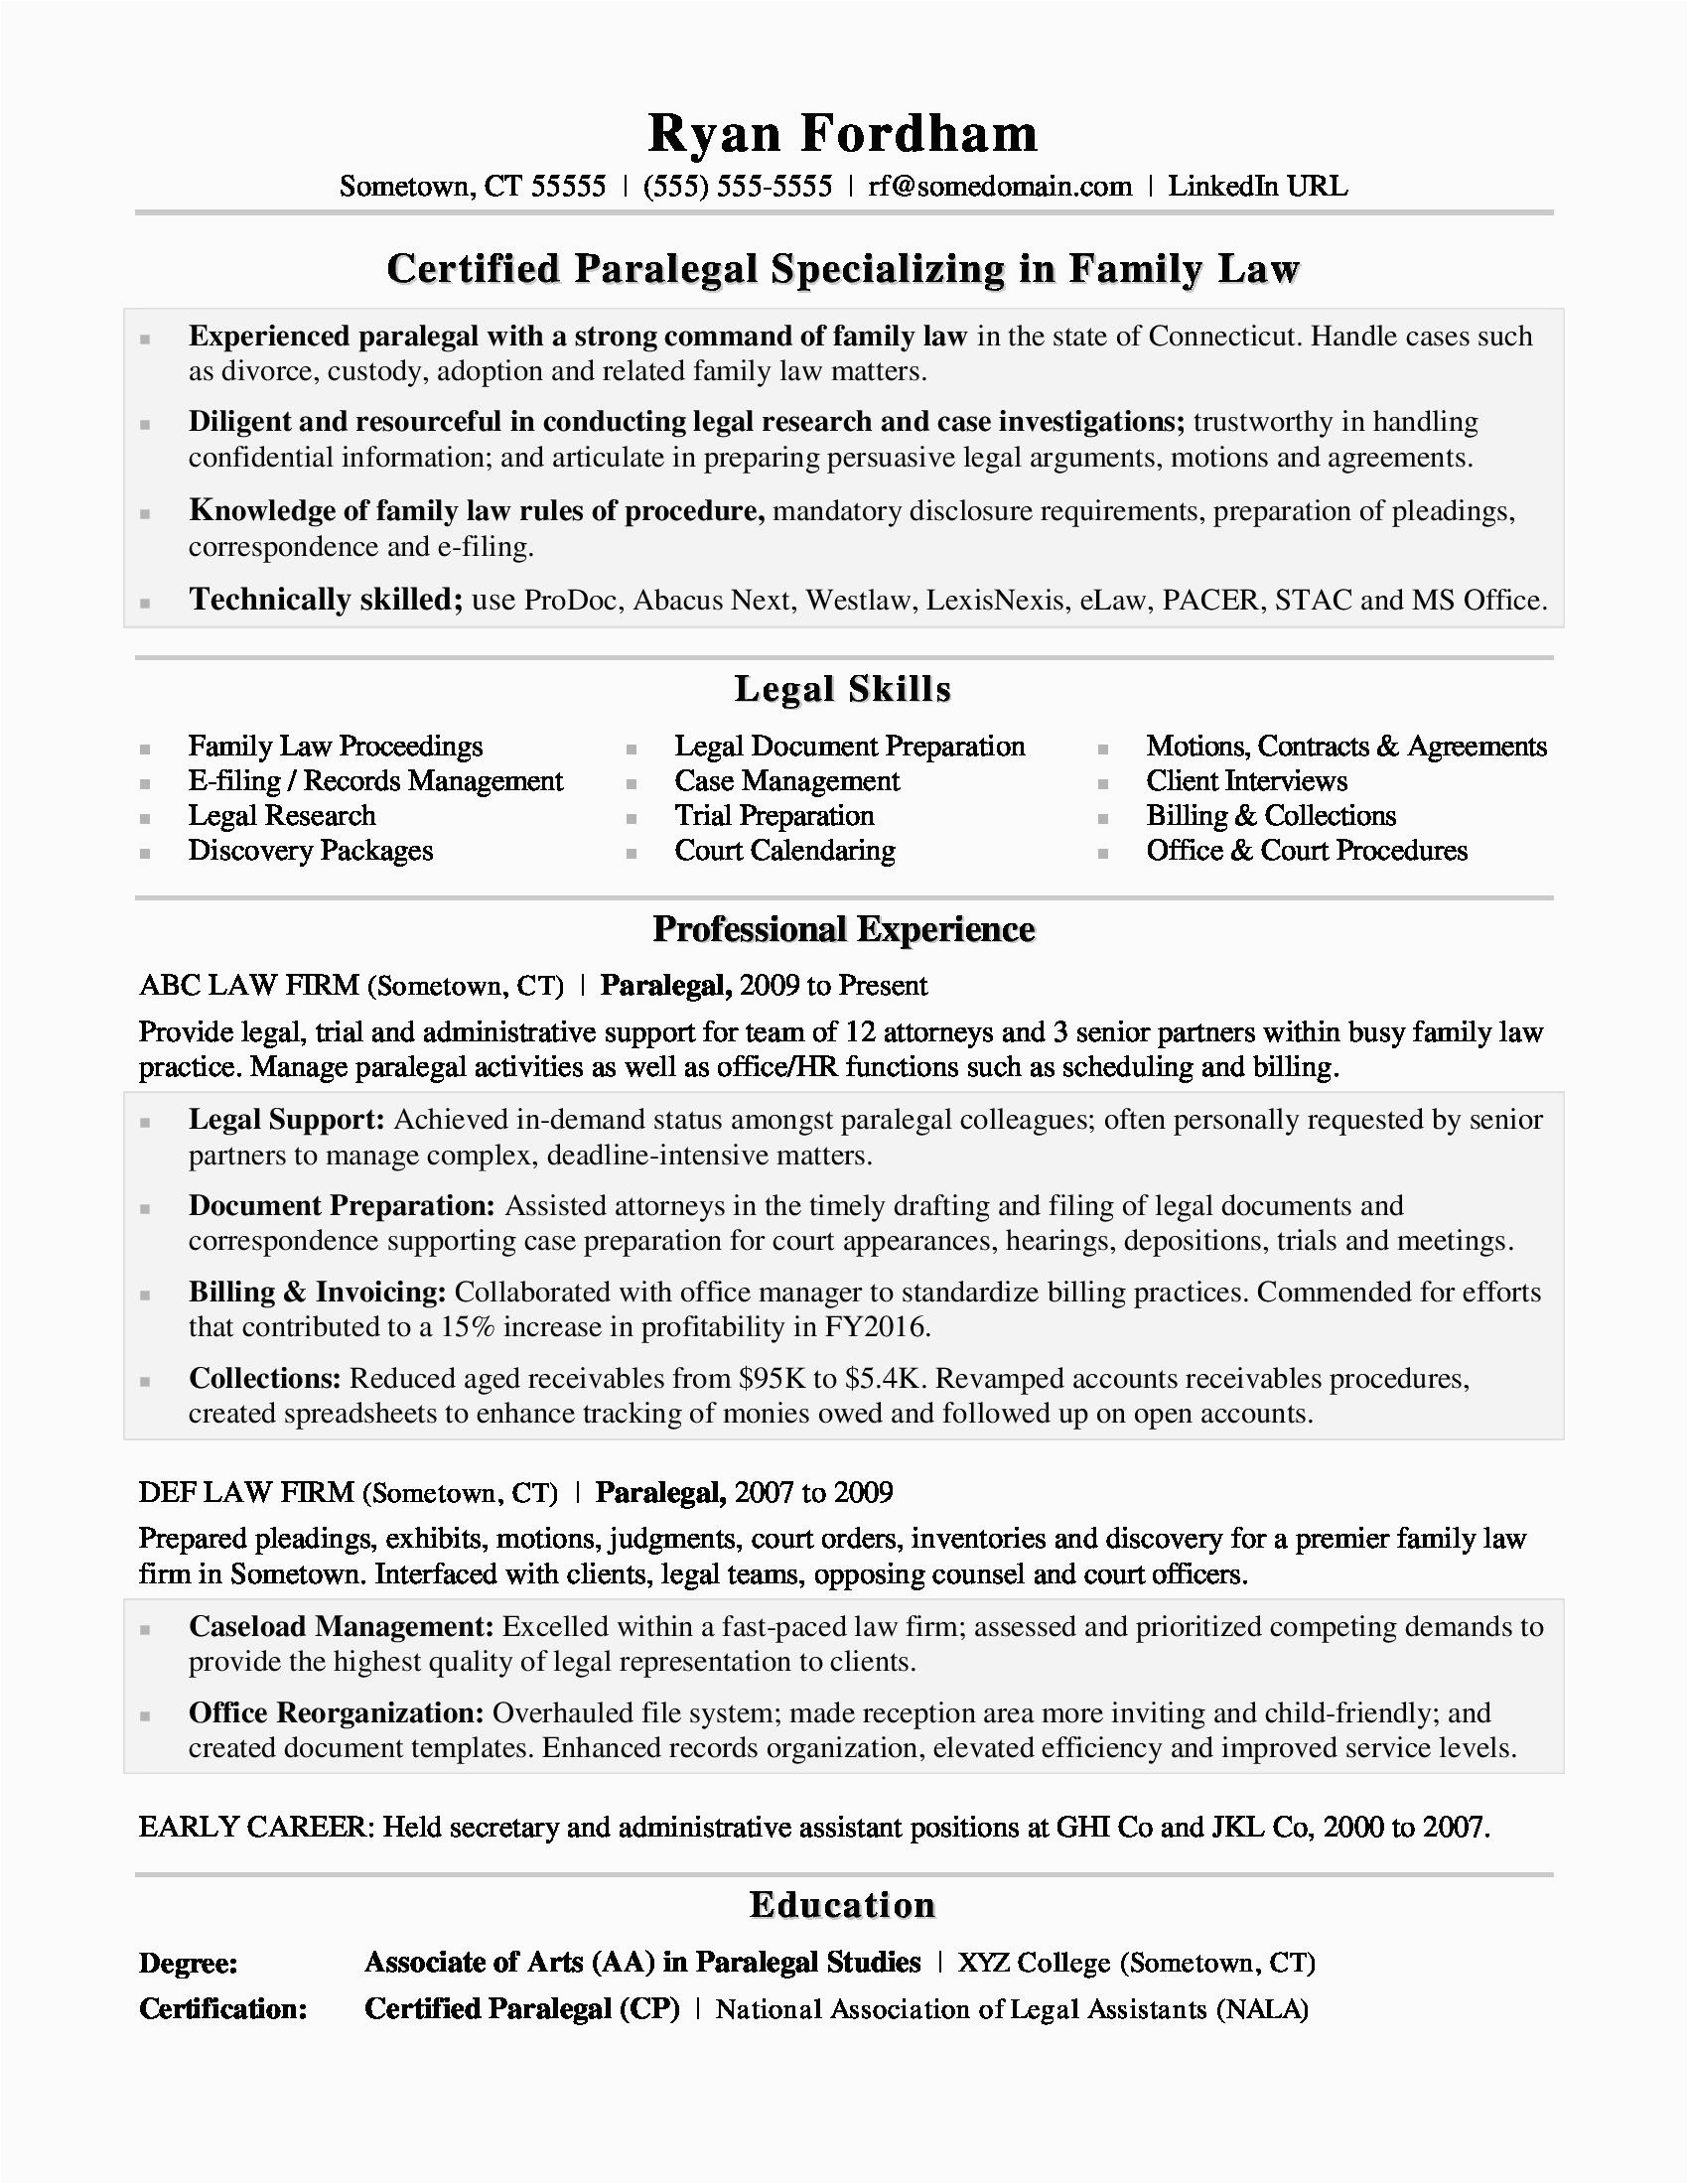 Entry Level Paralegal Resume Objective Sample Entry Level Paralegal Resume Mryn ism